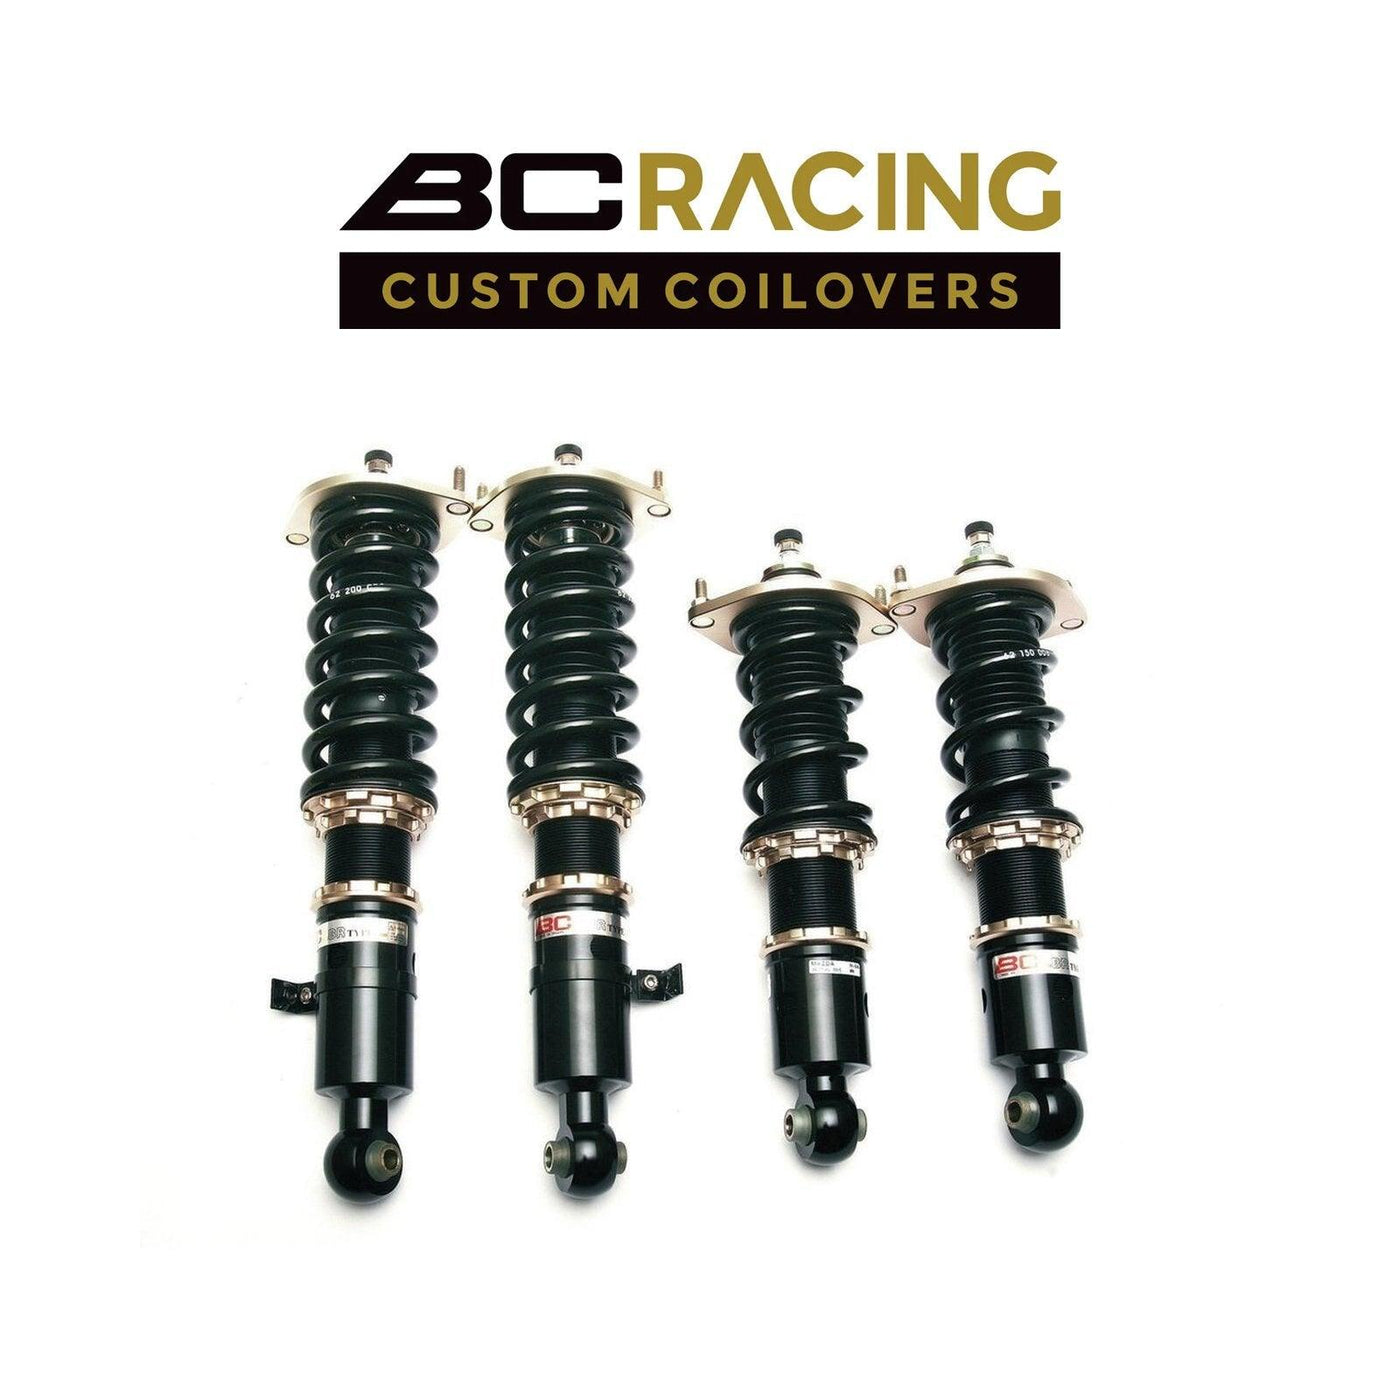 BC Racing Coilovers 2013-2018 LEXUS ES300h - Attacking the Clock Racing